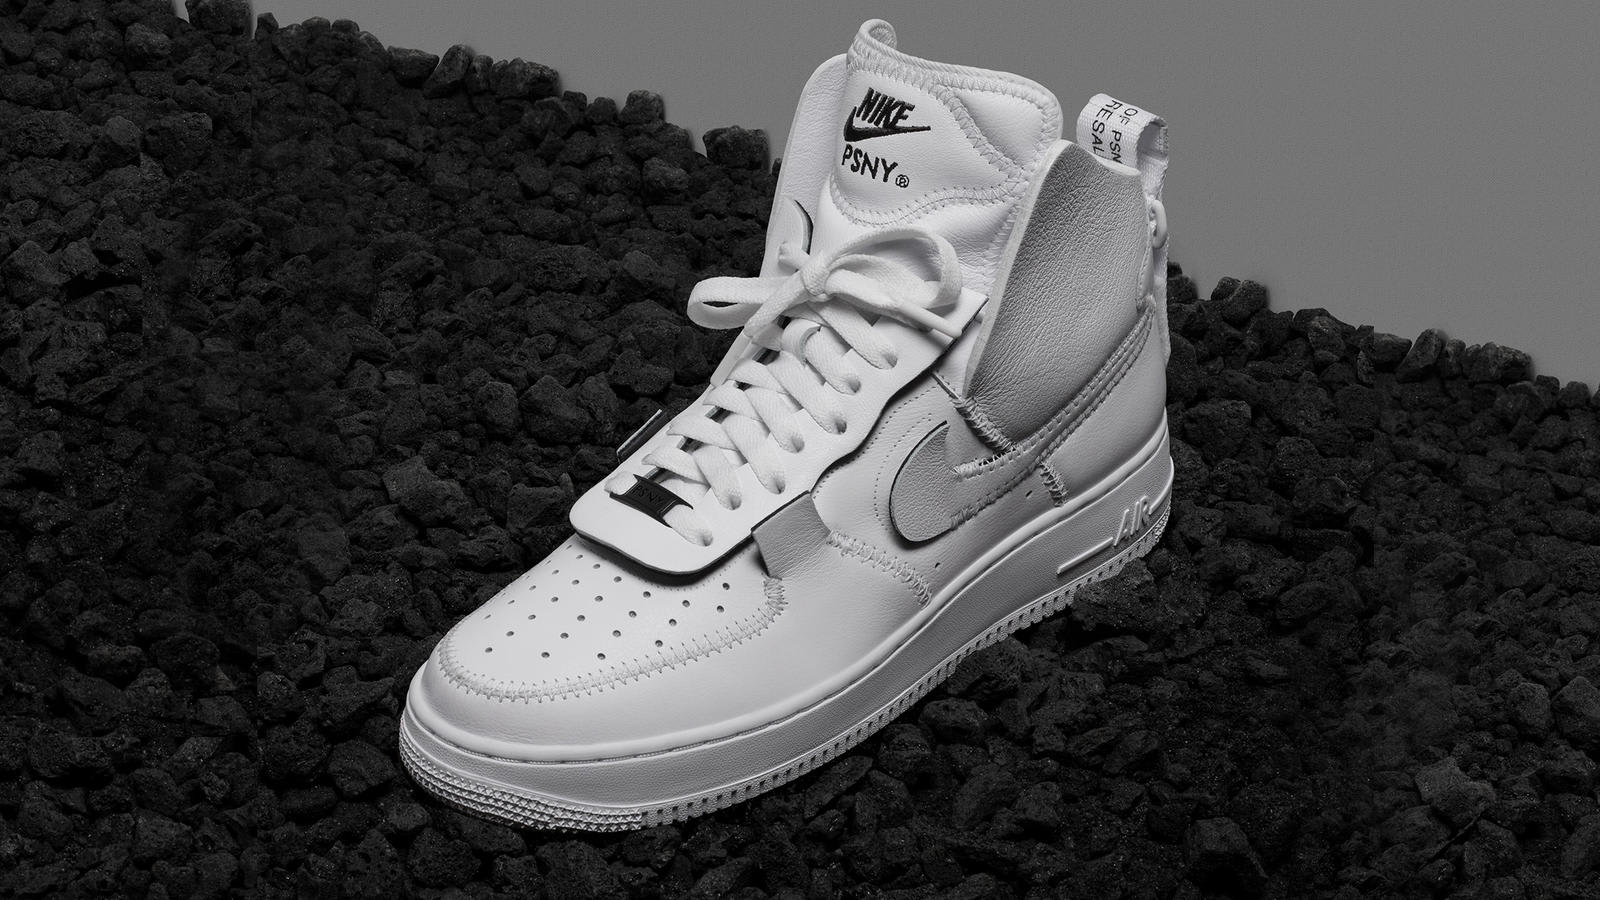 PSNY x Nike Air Force 1 High Black White Wolf Grey Release Date | Sole ...